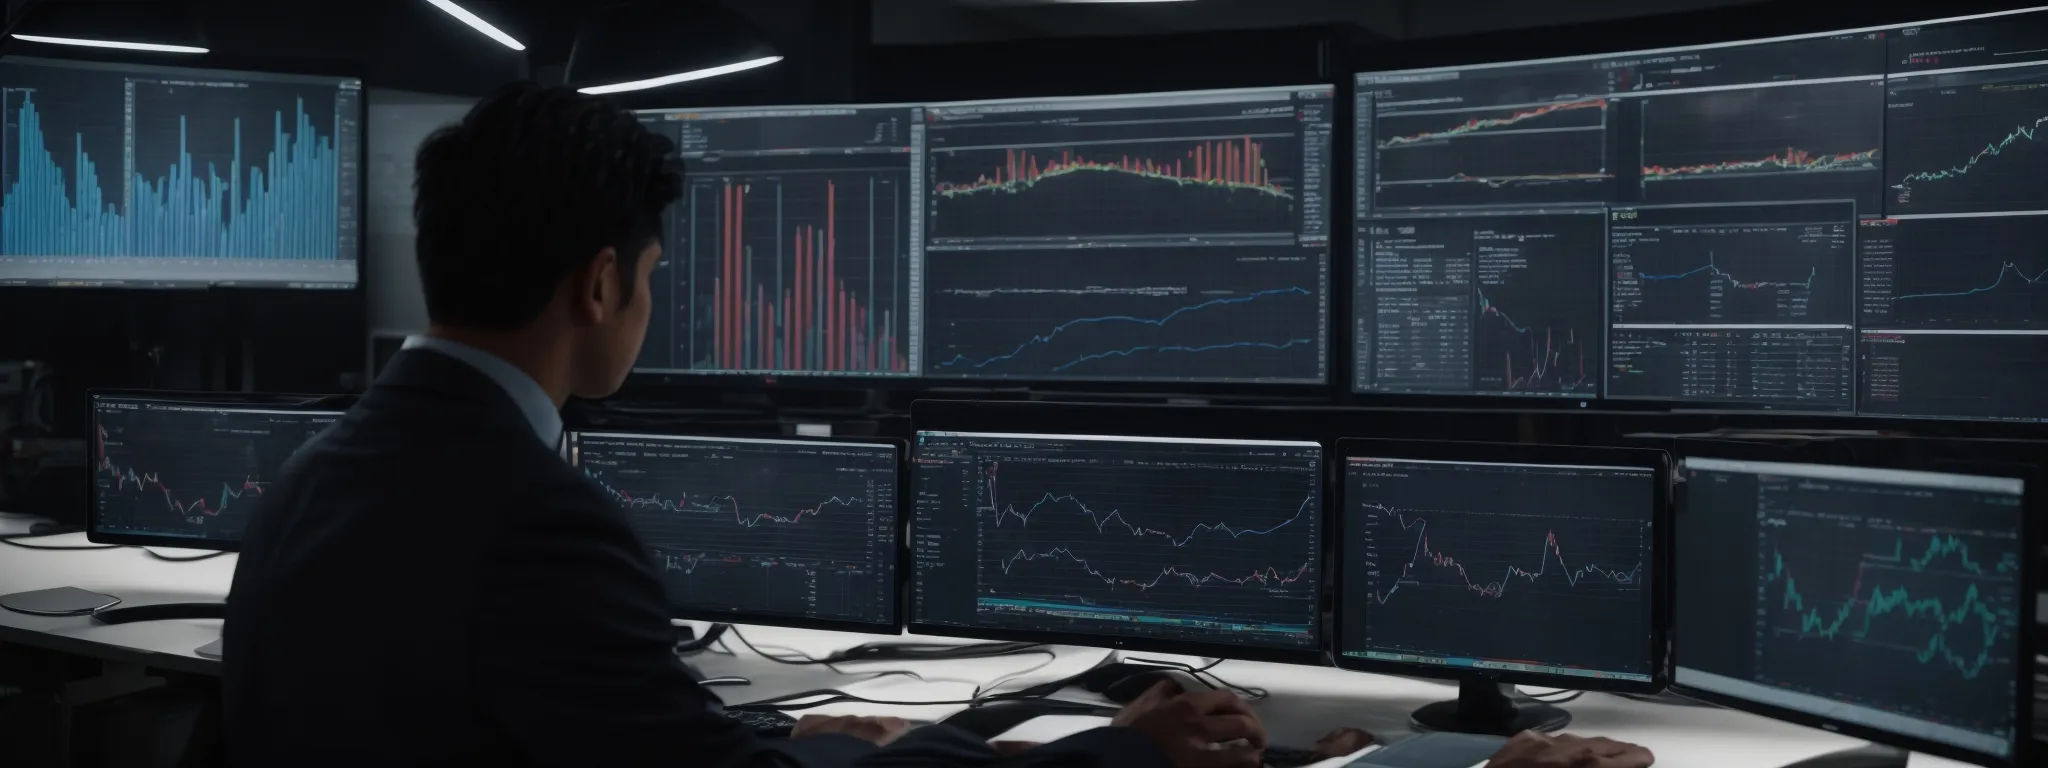 a person at a large desk with multiple computer screens displaying graphs and analytics while analyzing data trends.